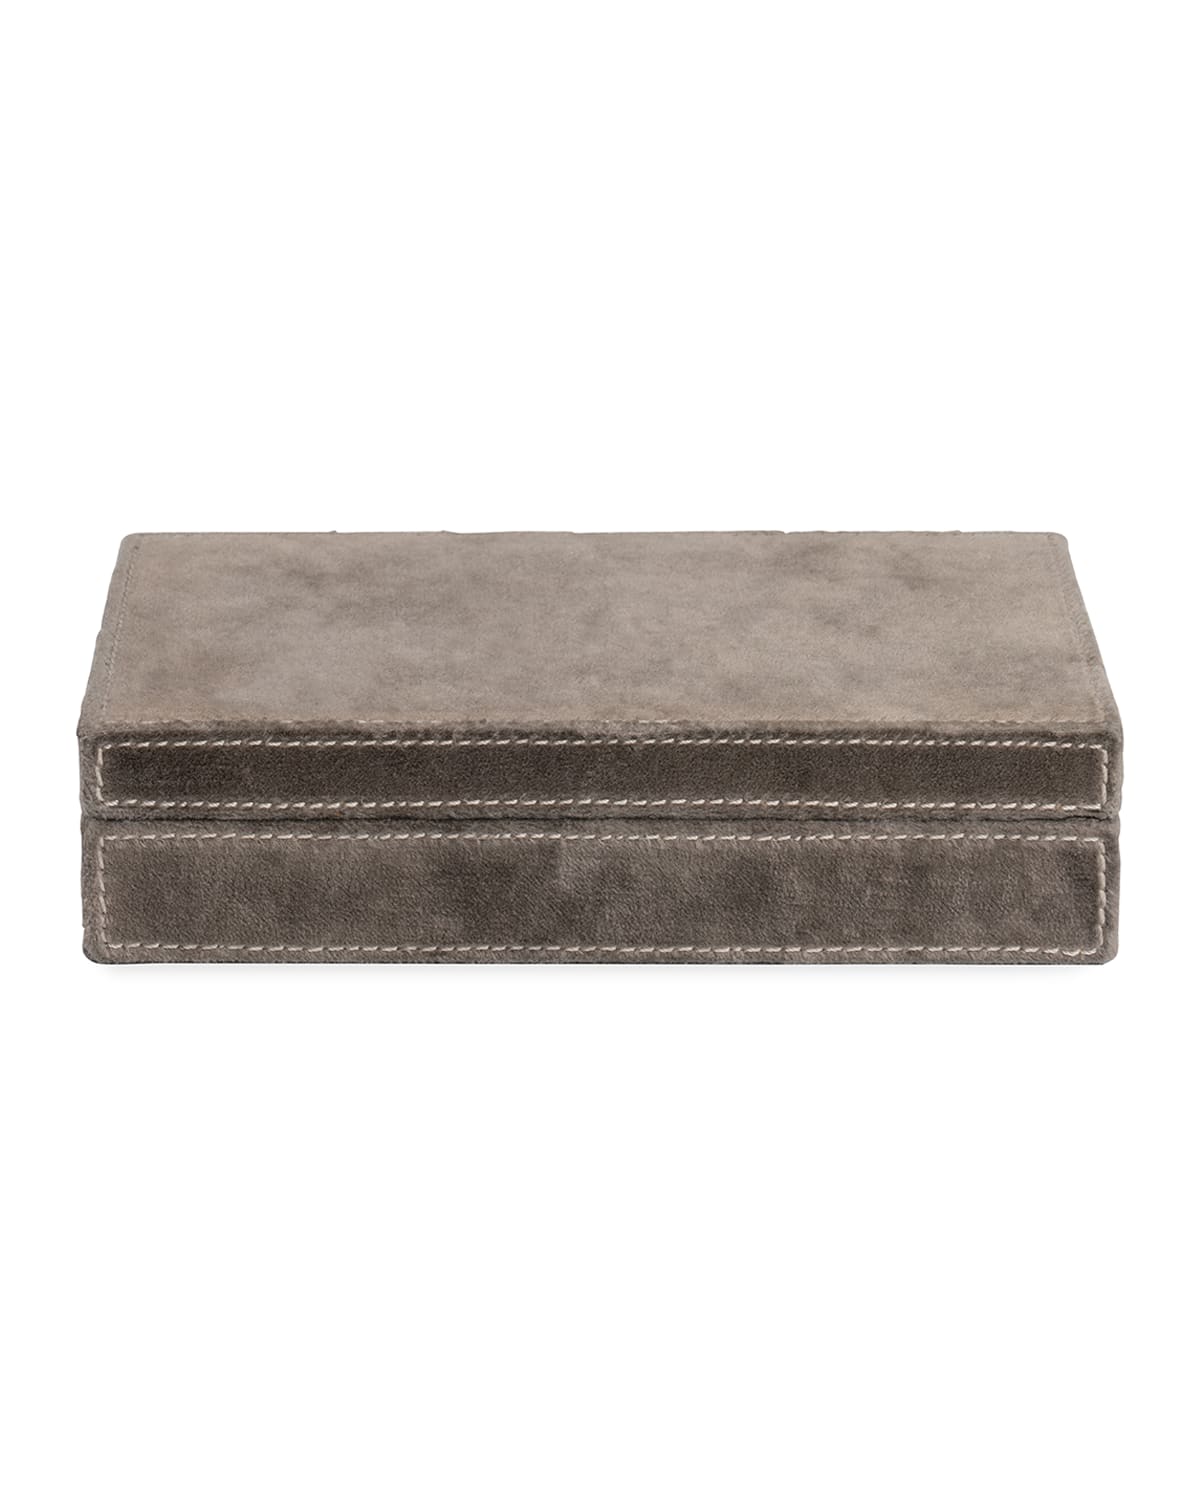 Shop Pigeon & Poodle Keokee Card Box Set In Charcoal